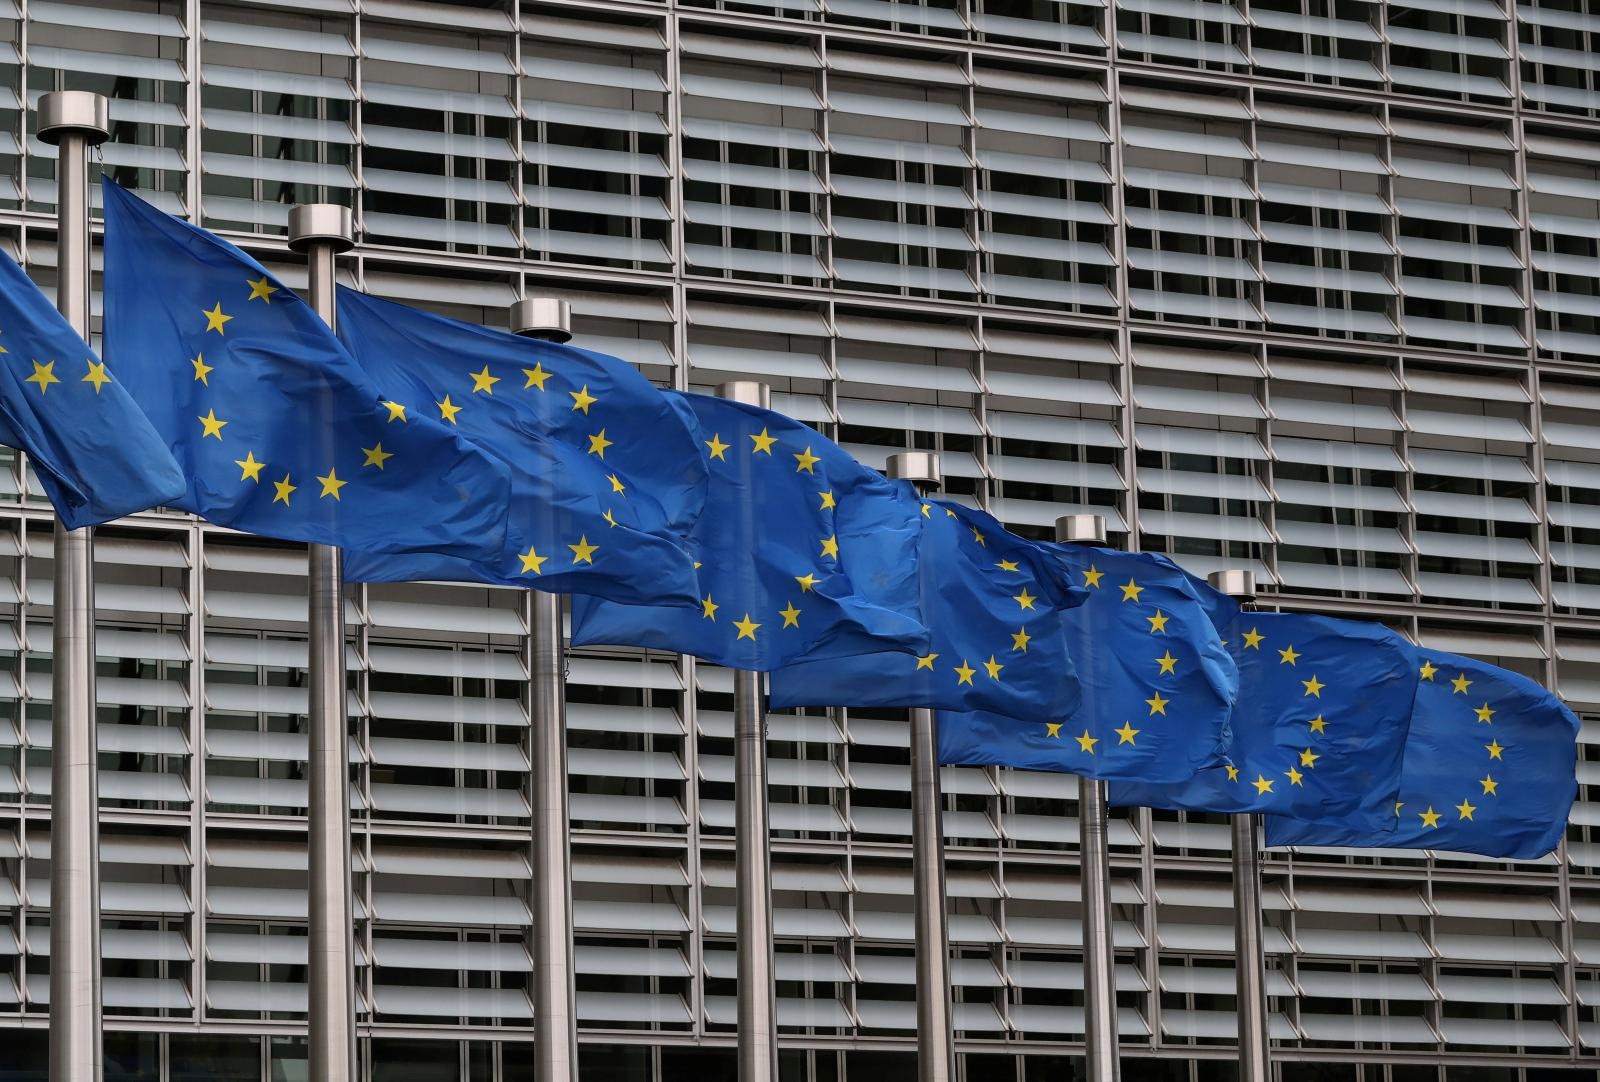 FILE PHOTO: European Union flags fly near the European Commission headquarters in Brussels FILE PHOTO: European Union flags fly near the European Commission headquarters in Brussels, Belgium, October 4, 2019. REUTERS/Yves Herman/File Photo Yves Herman